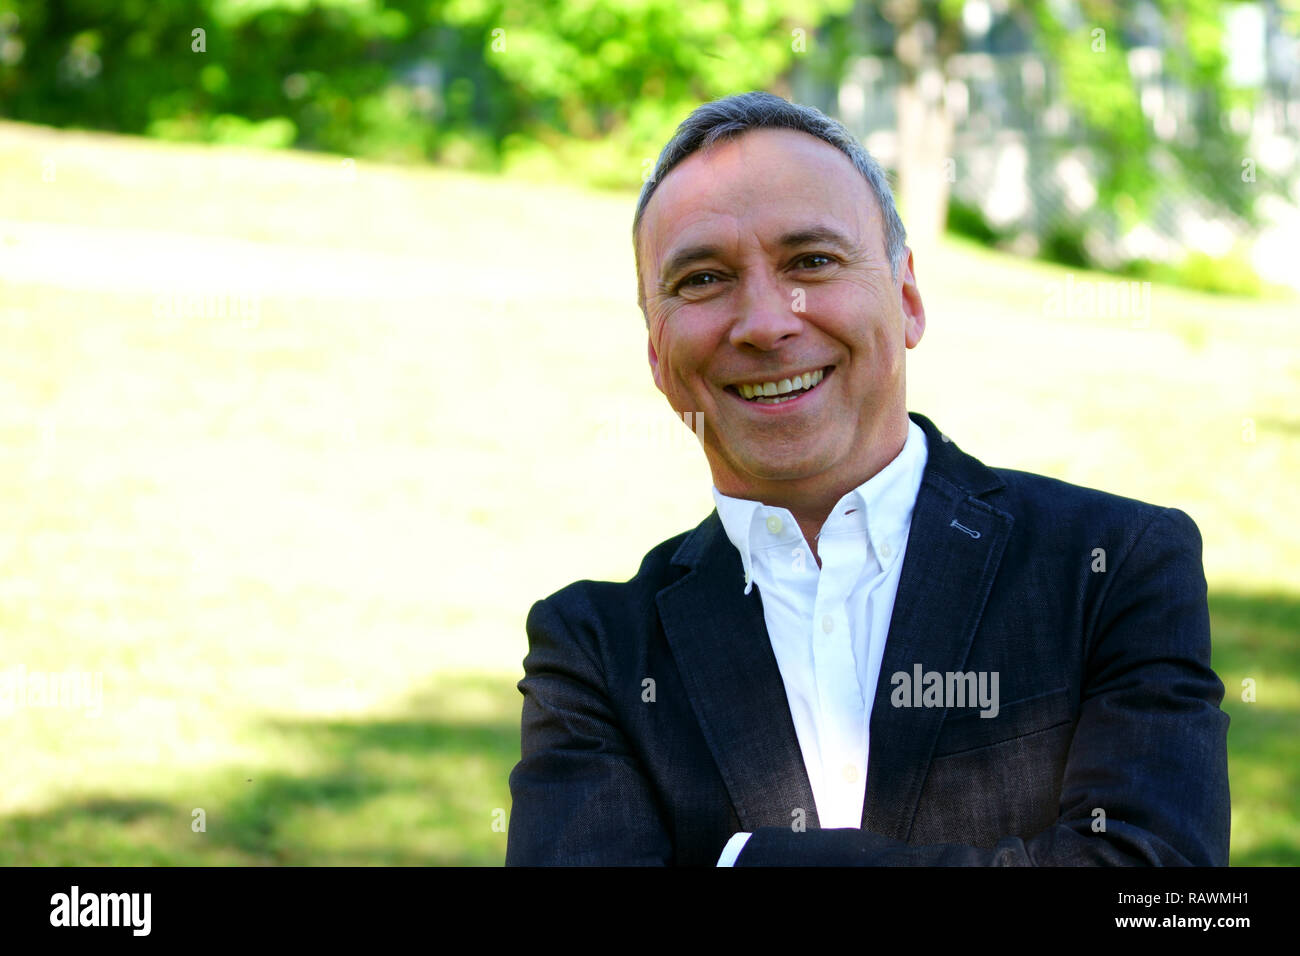 An outdoor close up portrait of a proud caucasian man wearing a white shirt, a black coat and smiling at the camera. Stock Photo